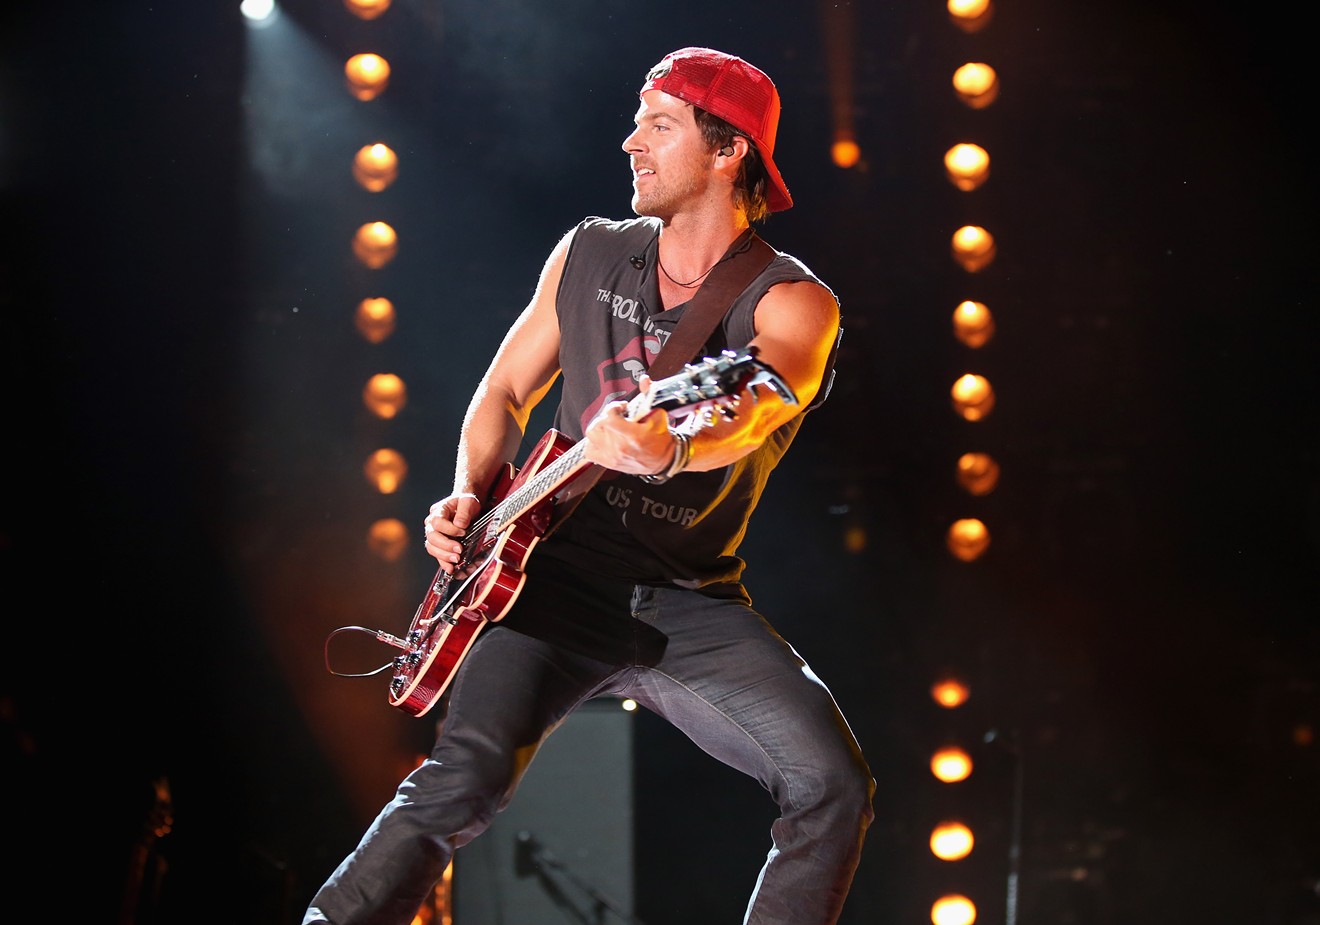 Country fans, rejoice: A country music festival is coming to the 305 (and so is Kip Moore).